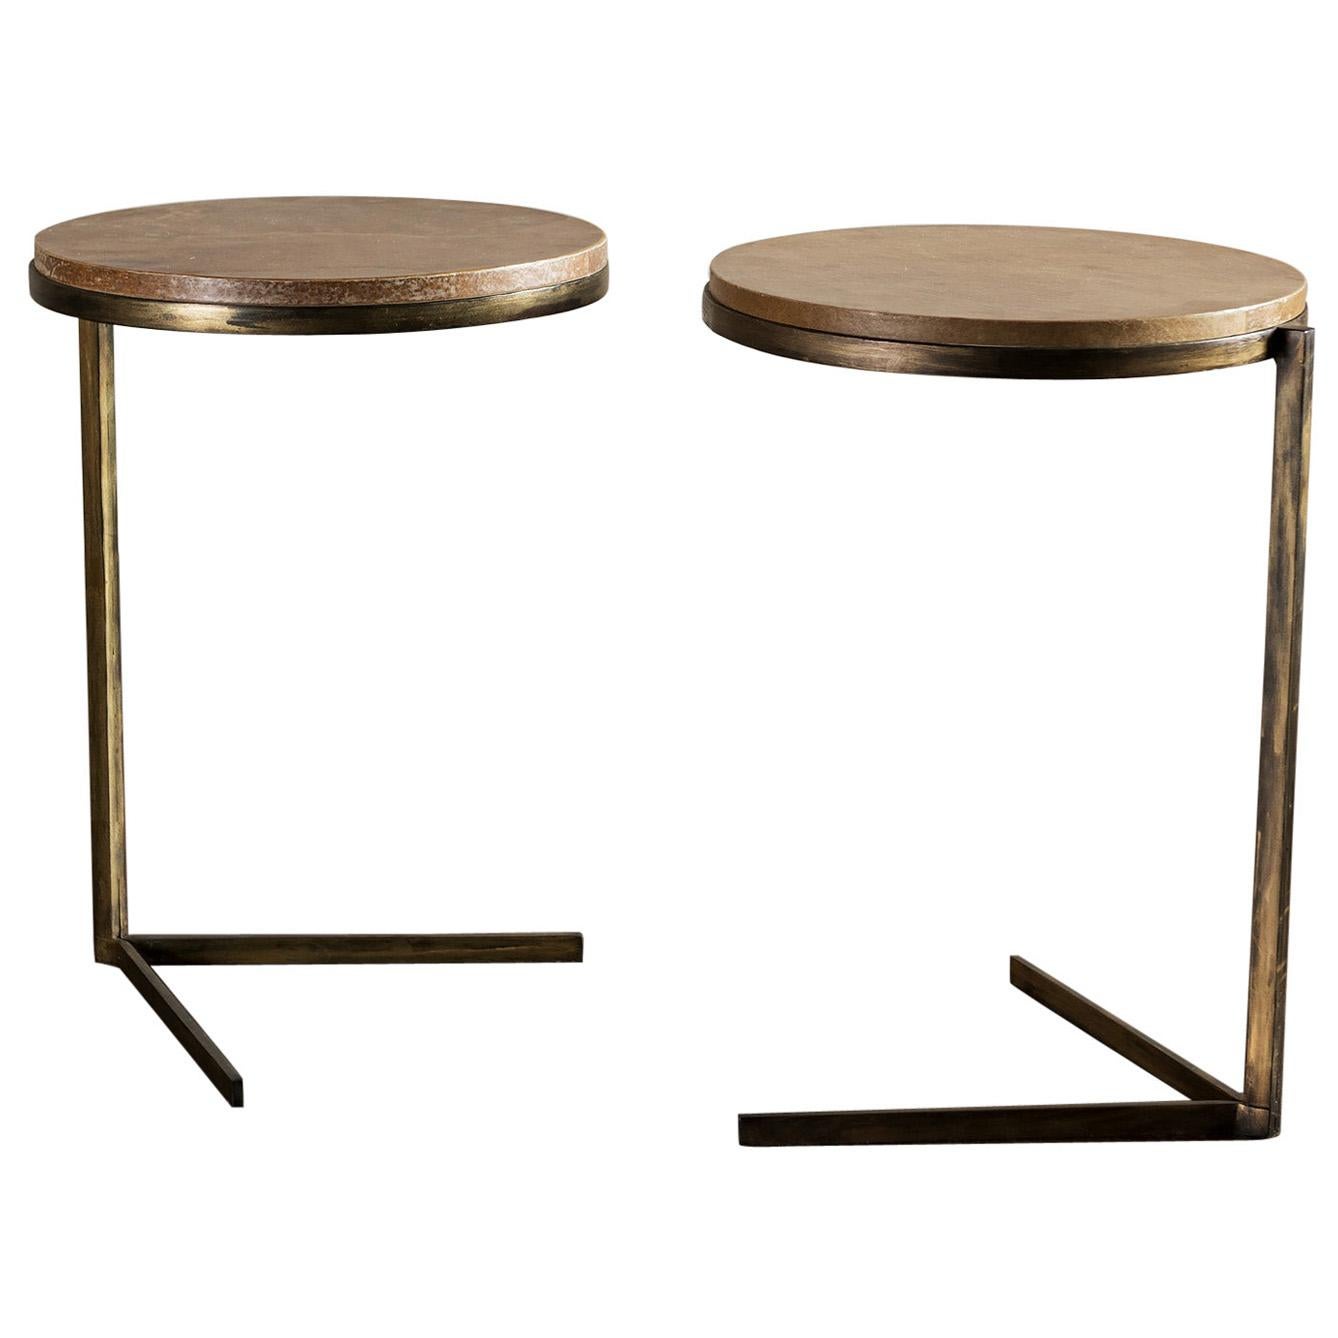 Pair of Round Iron Side Tables with Parchment Tops, France, 1950s